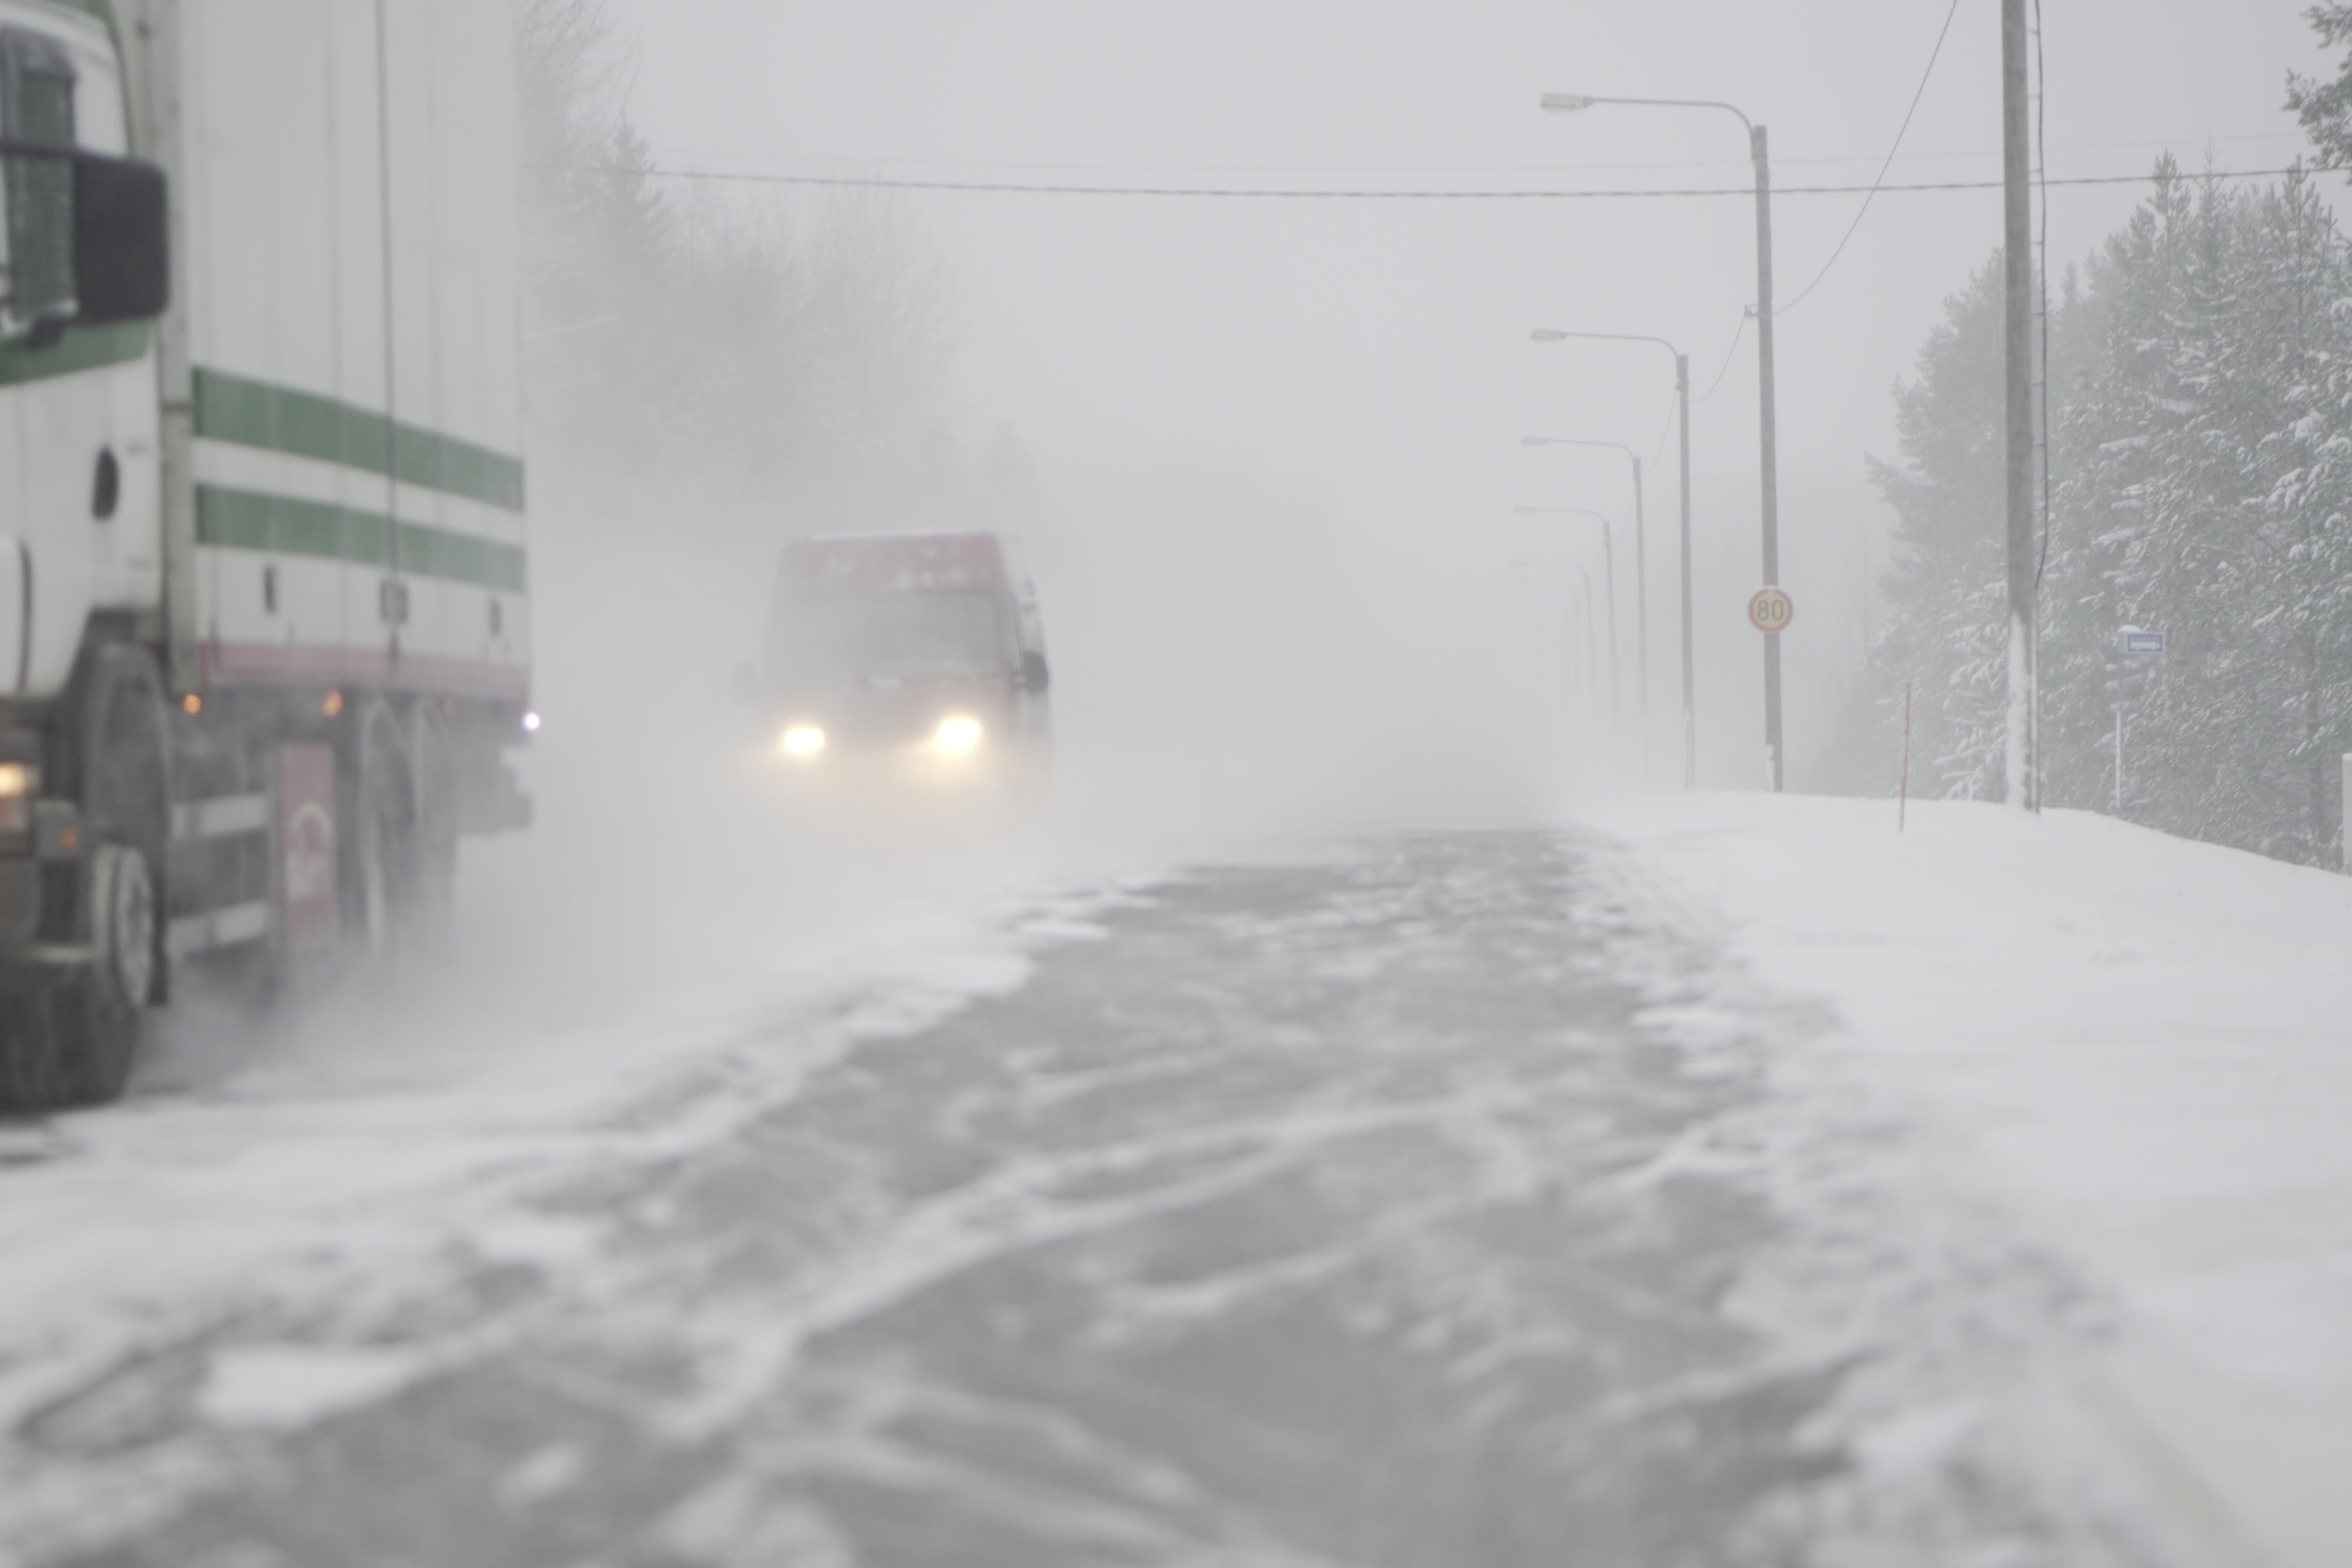 The Finnish Meteorological Institute warns of bad driving conditions on Saturday